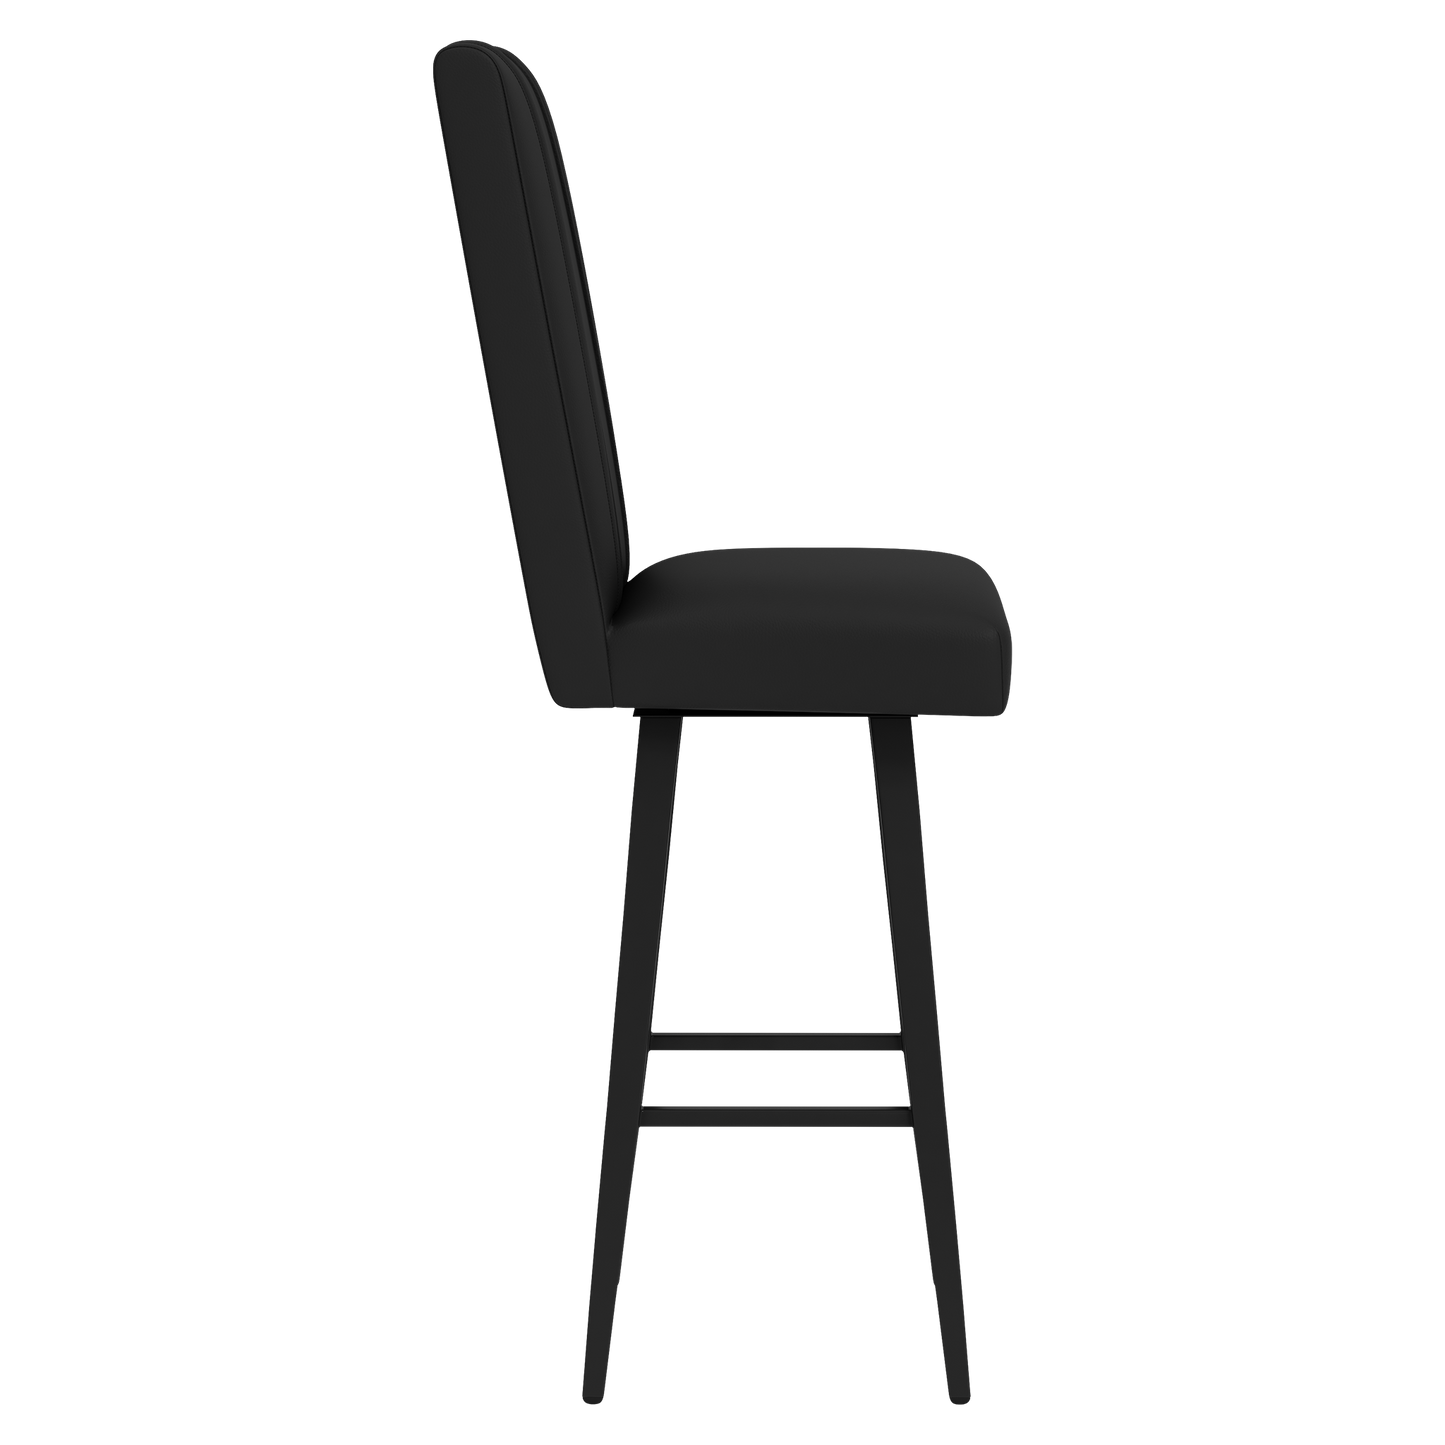 Swivel Bar Stool 2000 with Montreal Expos Cooperstown